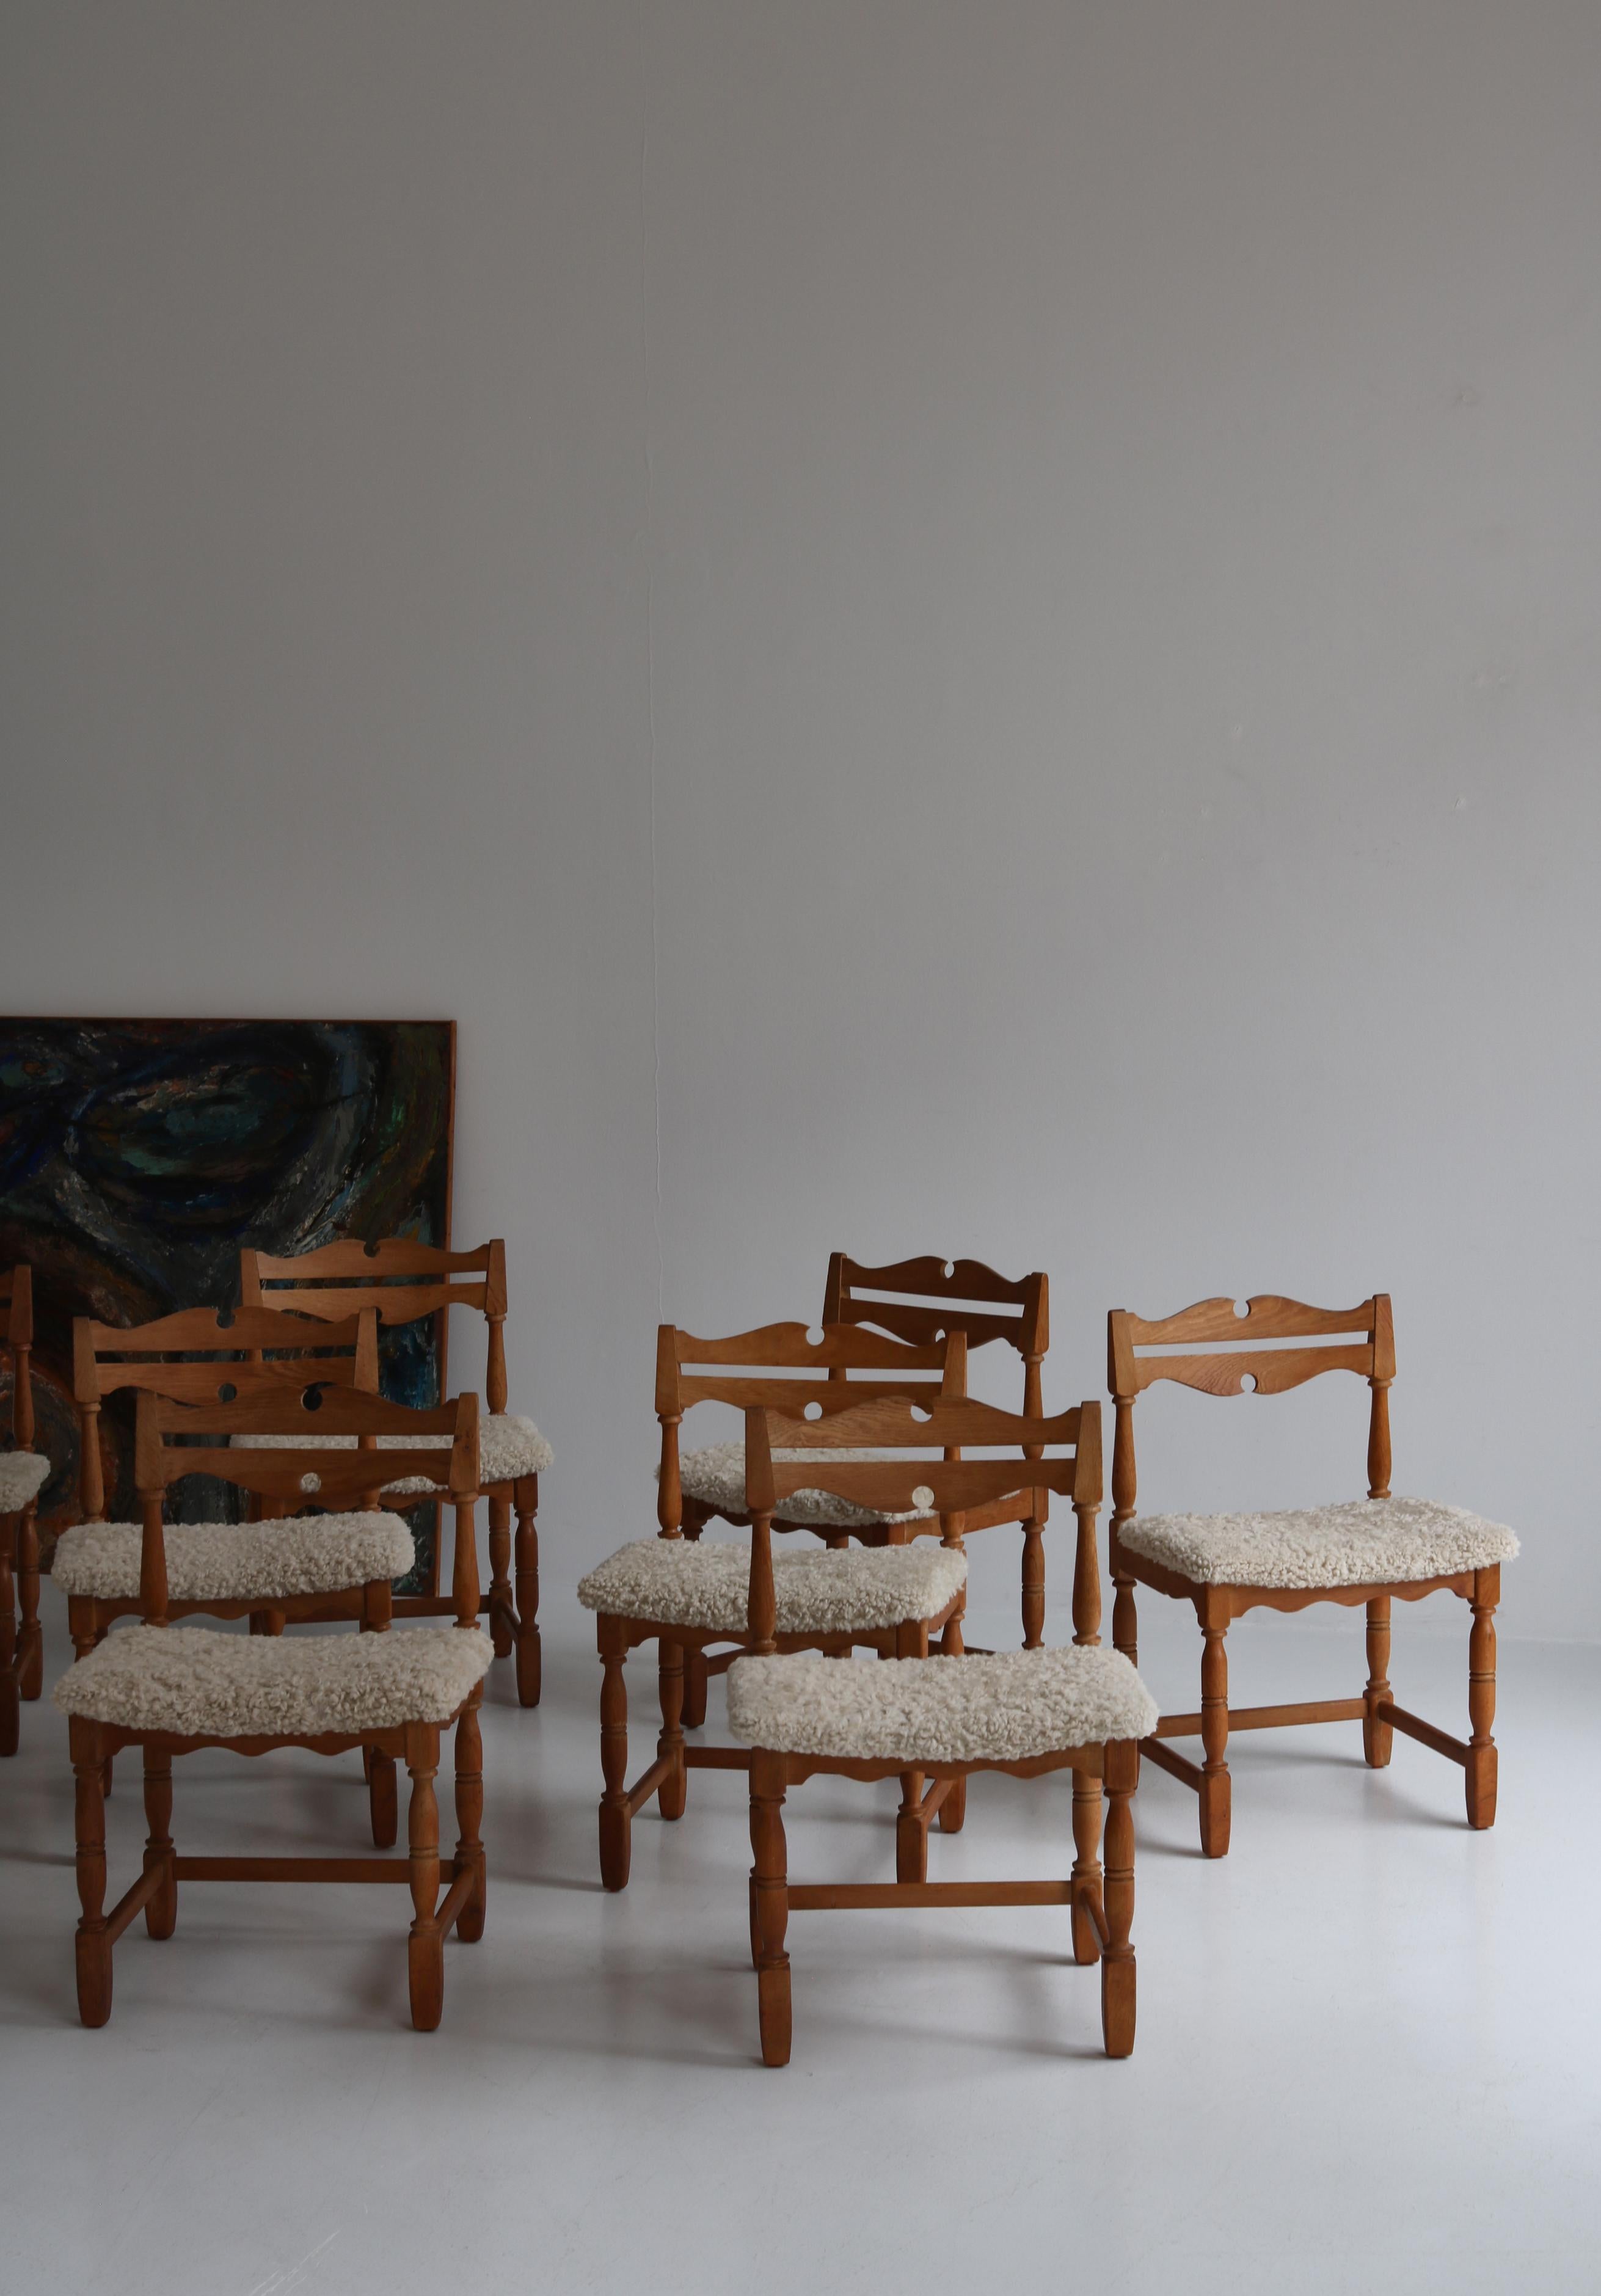 Set of 8 vintage dining chairs in solid patinated Scandinavian oak and reupholstered in sheepskin. This model was designed in the 1960s and is ascribed to Danish designer Henry Kjærnulf. This set was manufactured by the 